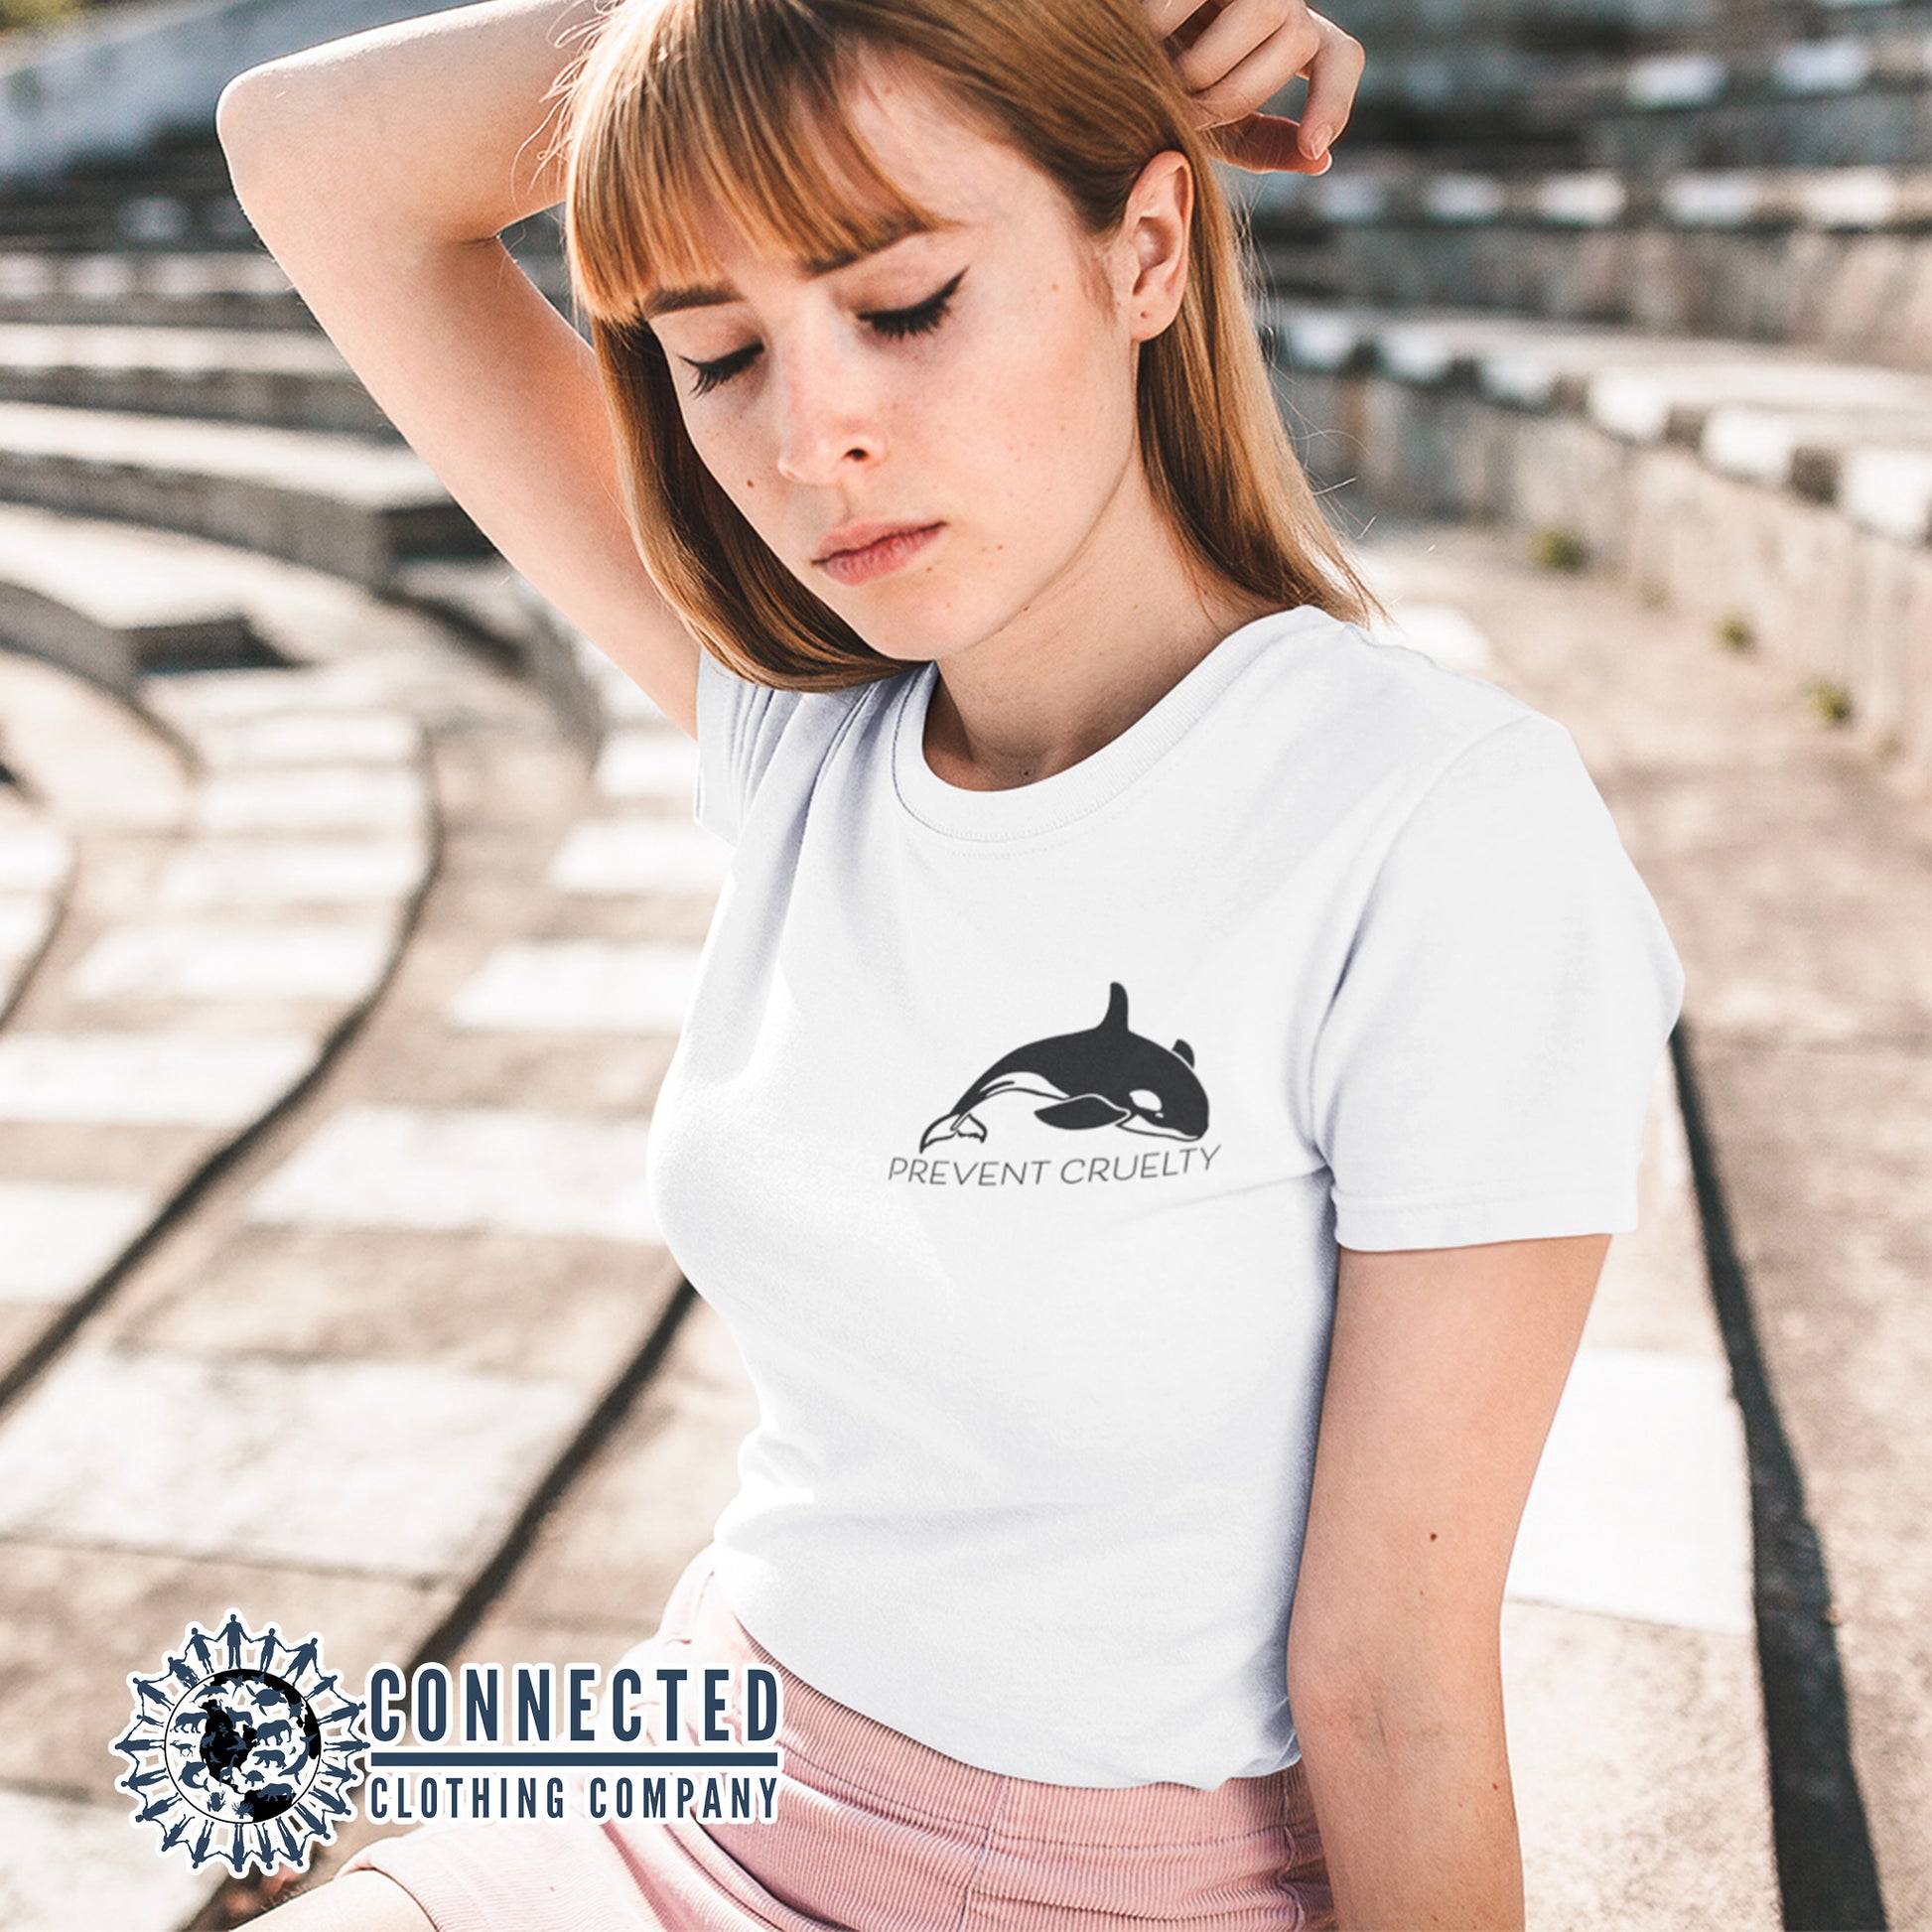 Model Wearing White Prevent Cruelty Orca Short-Sleeve Tee - Connected Clothing Company - Ethically and Sustainably Made - 10% donated to Humane Society International animal cruelty prevention